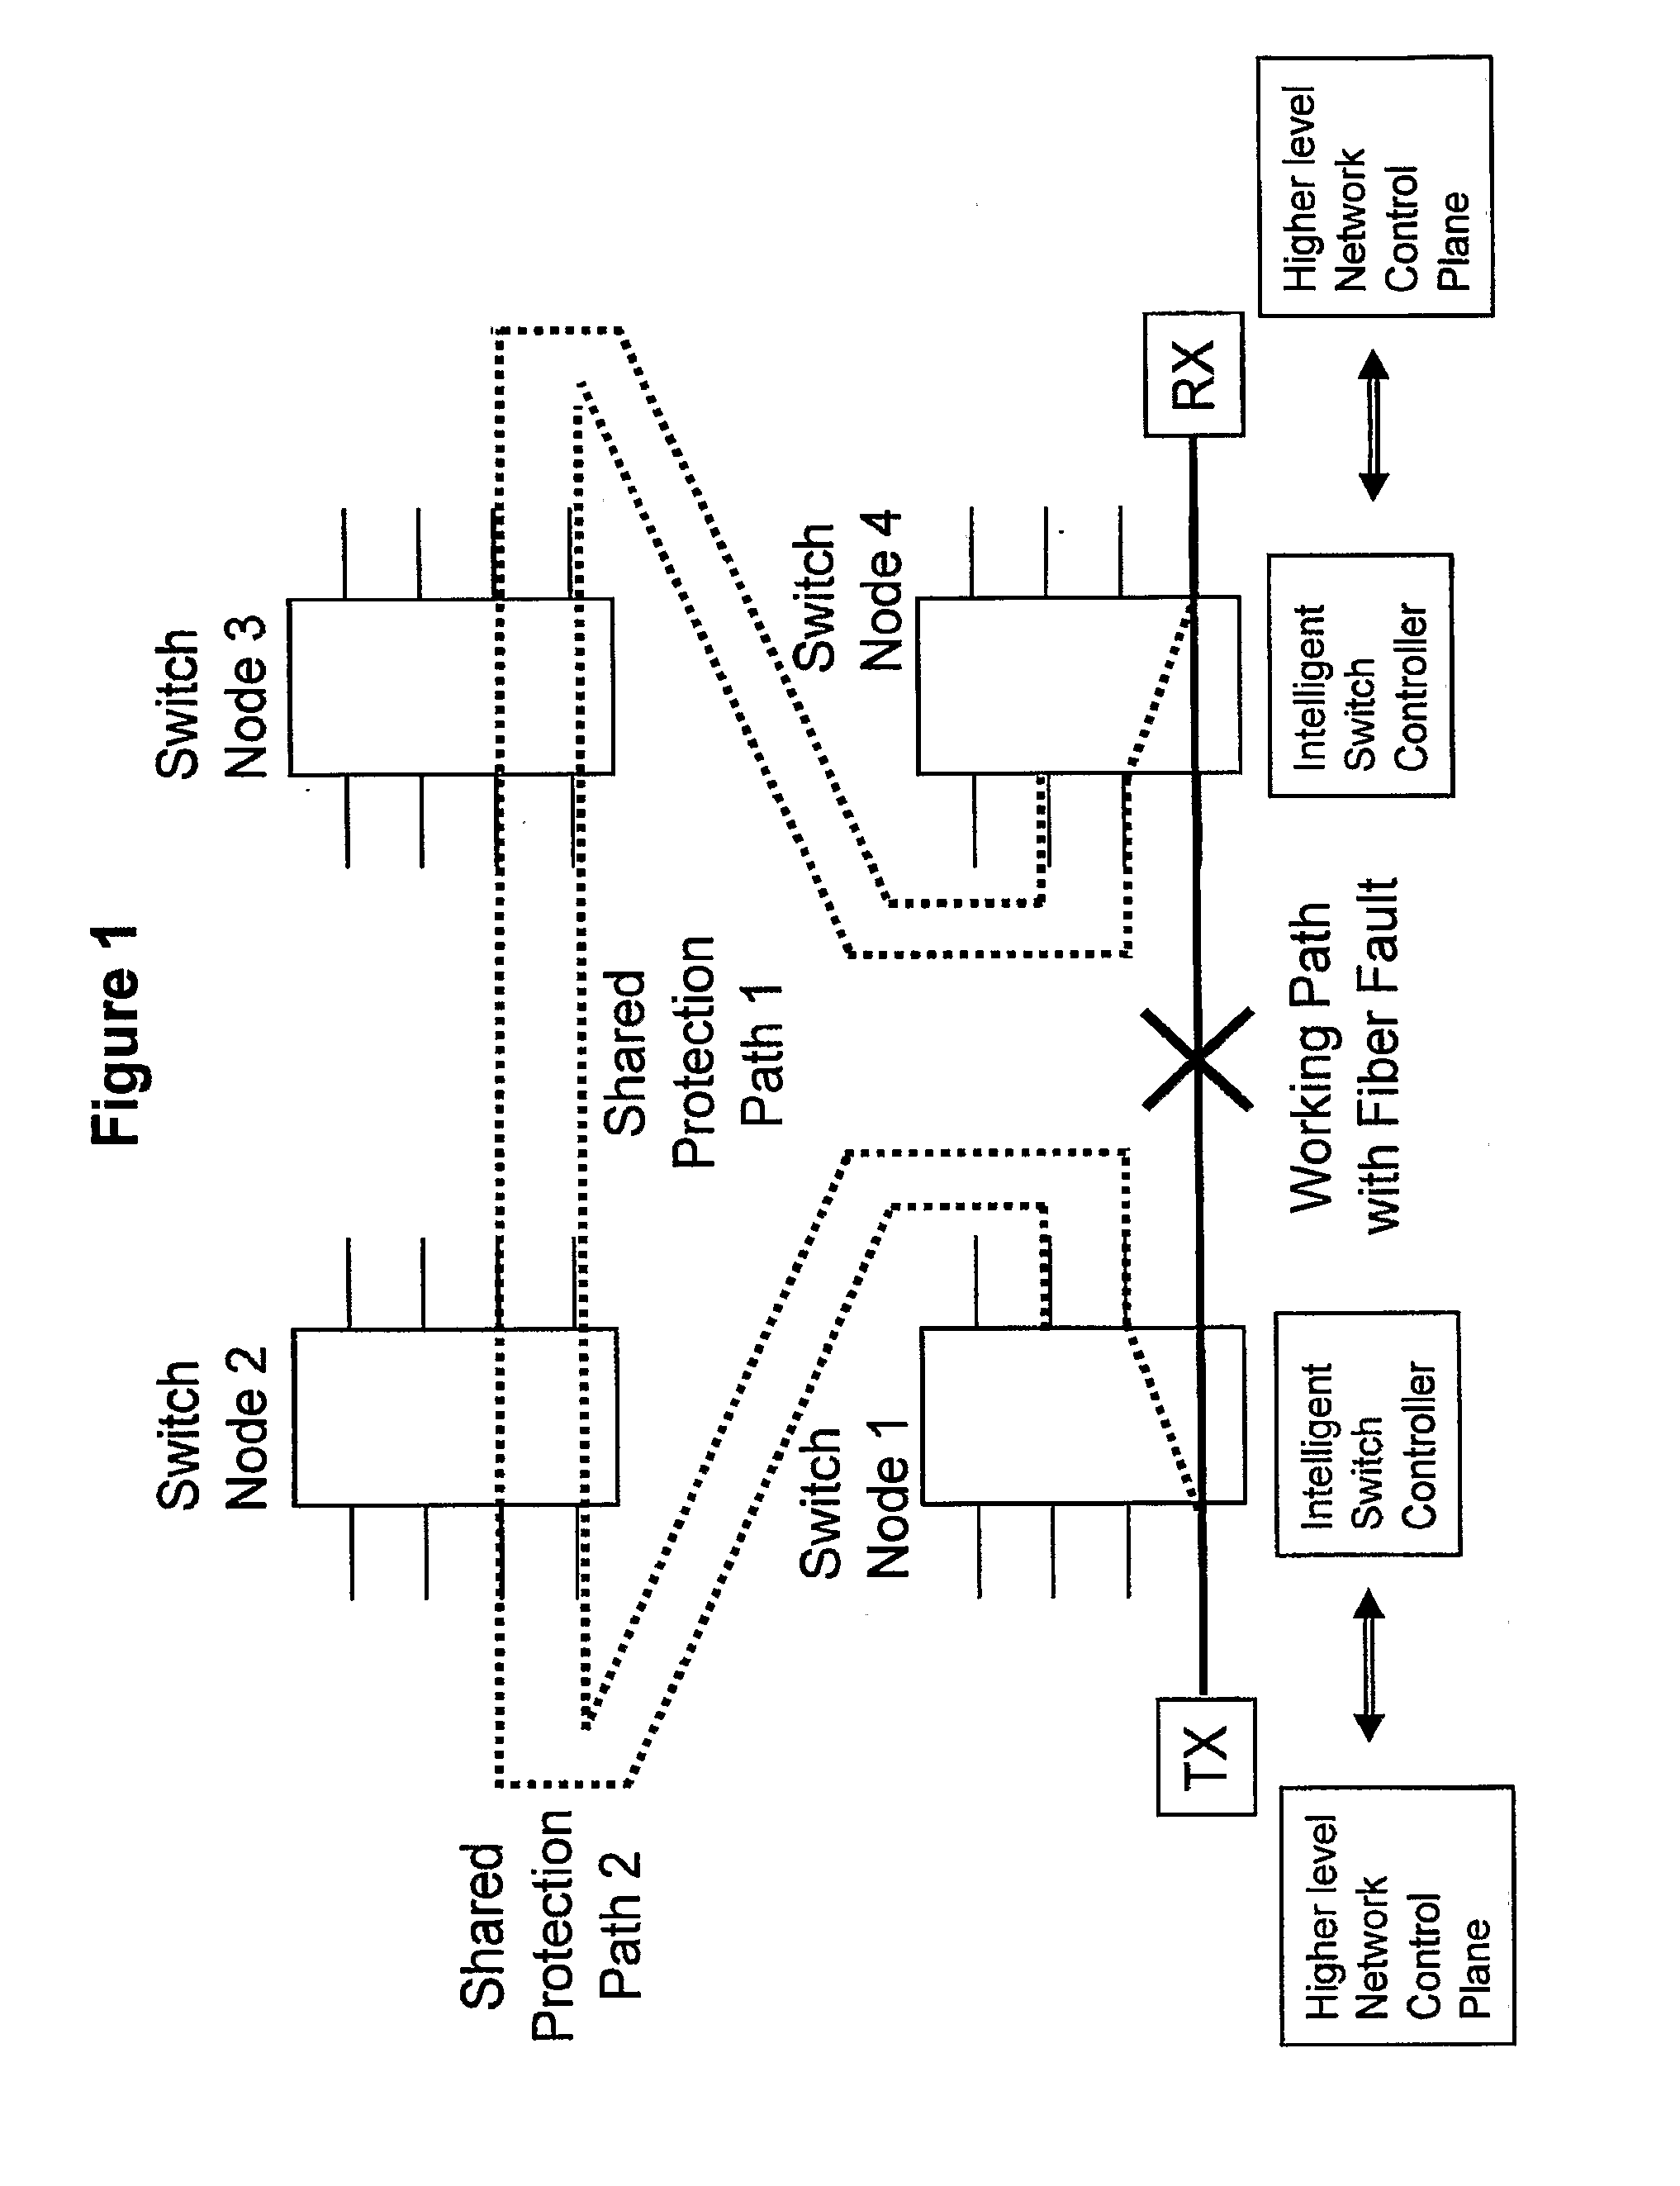 Network Protection Switching Mechanisms and Methods of Network Protection